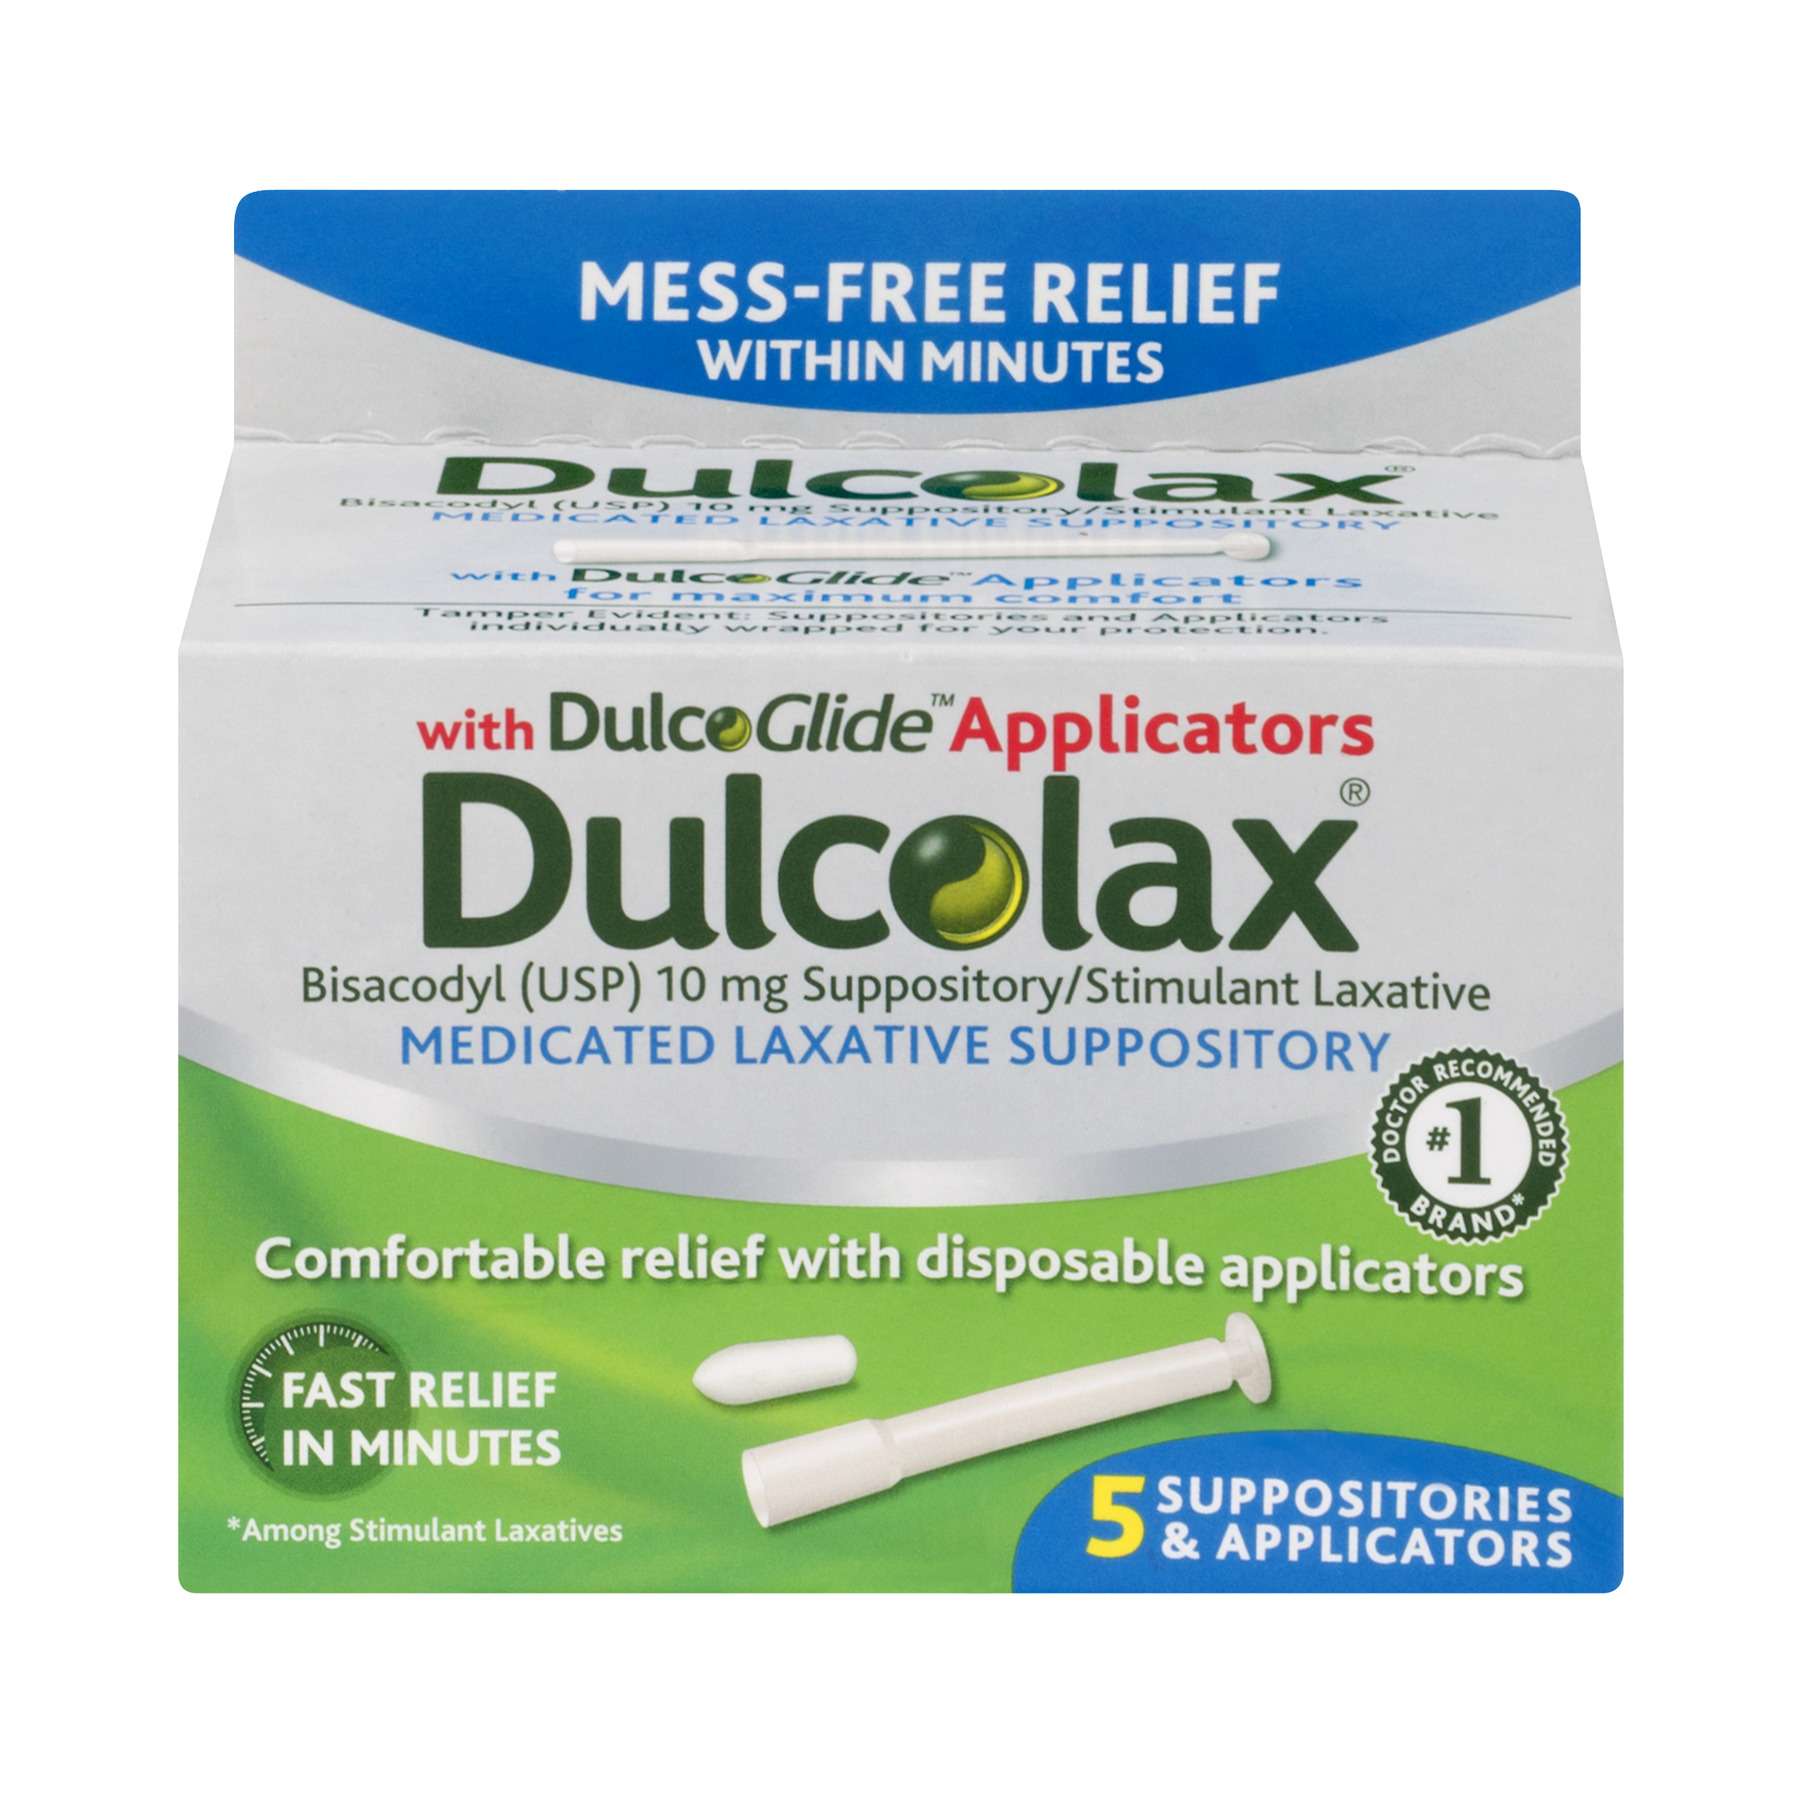 Dulcolax Medicated Laxative Suppositories with DulcoGlide Applicators ...